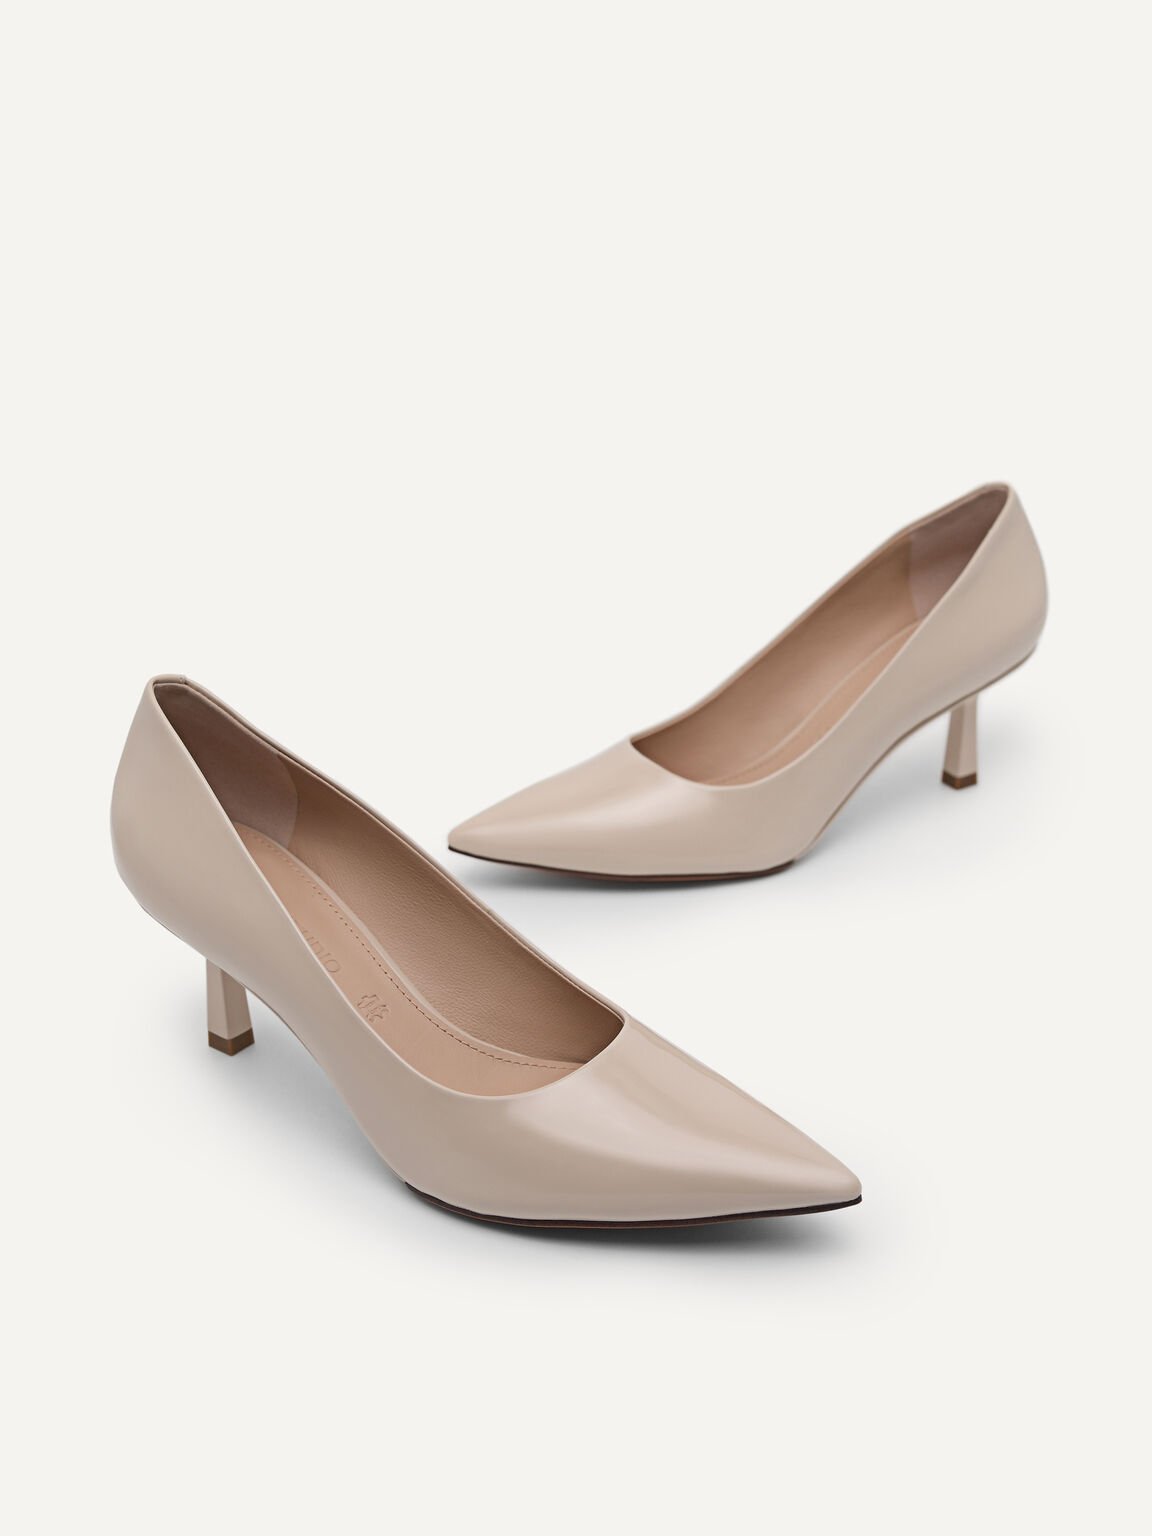 PEDRO Studio Tina Patent Leather Pointed Pumps, Nude